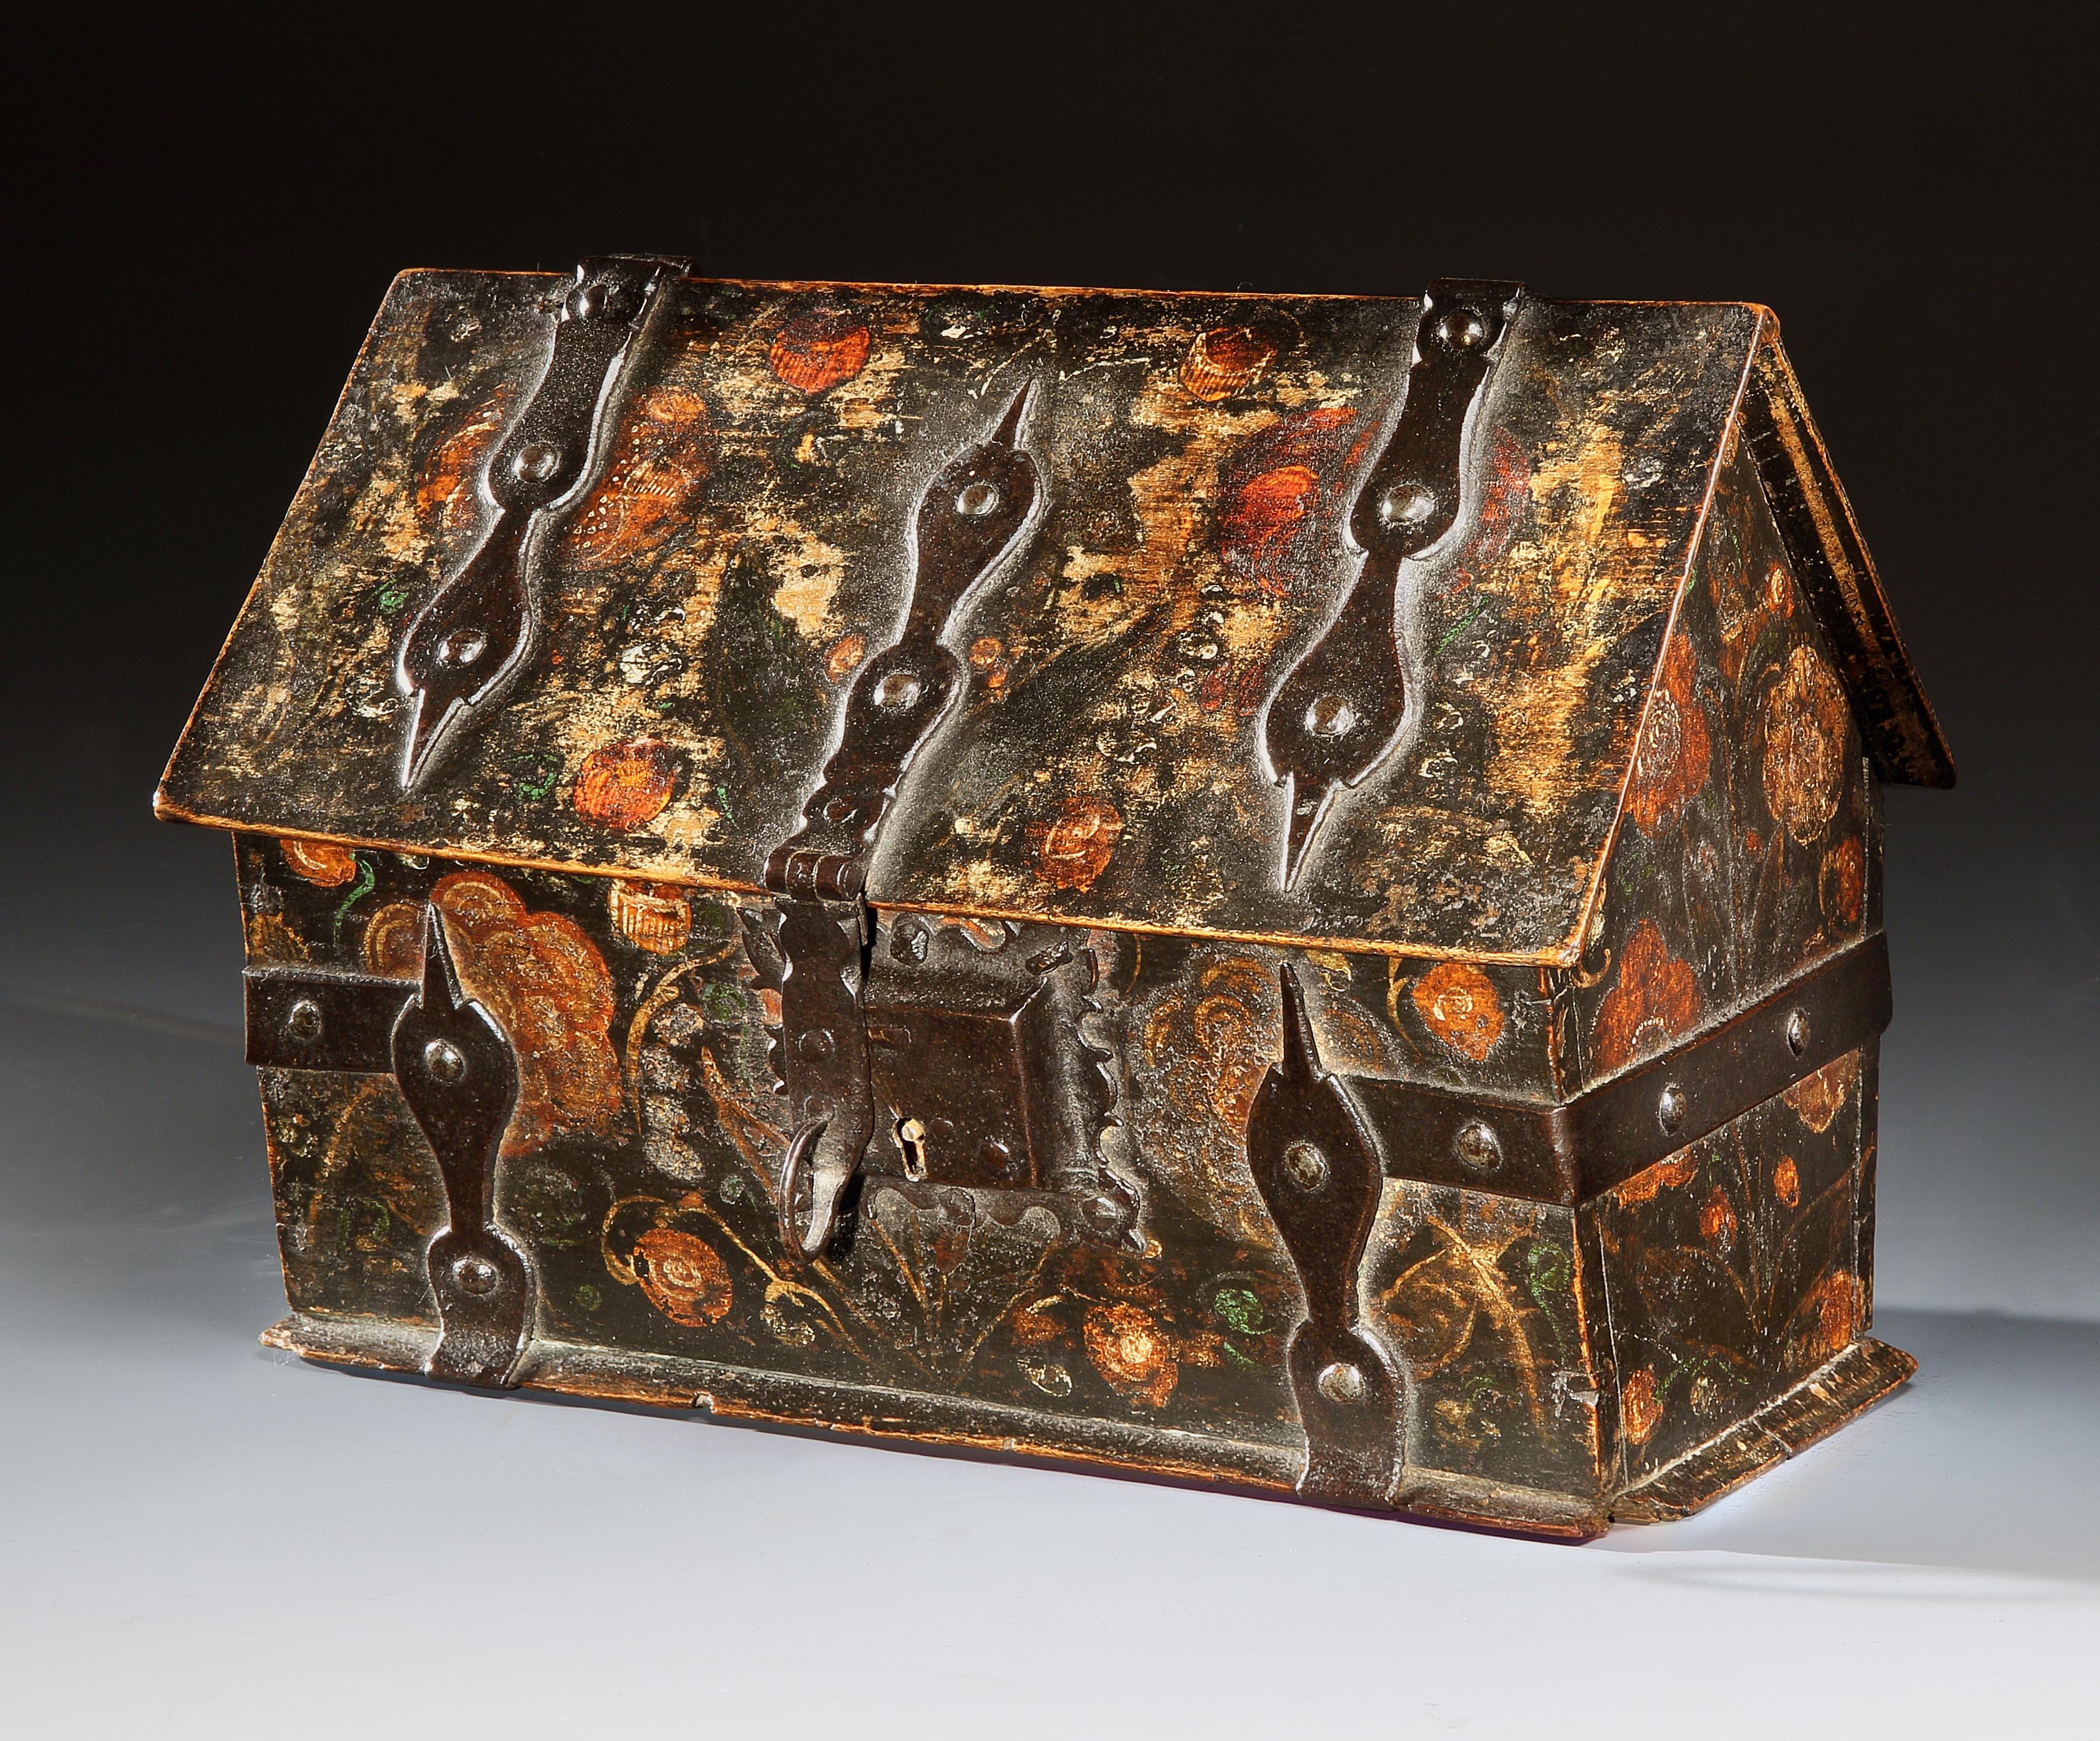 This charming and unusual casket injects a romantic atmosphere into any interior. It has survived in impeccable condition with acceptable wear to the painted surface which signifies its age and use. It is a conversation piece, a piece of acting